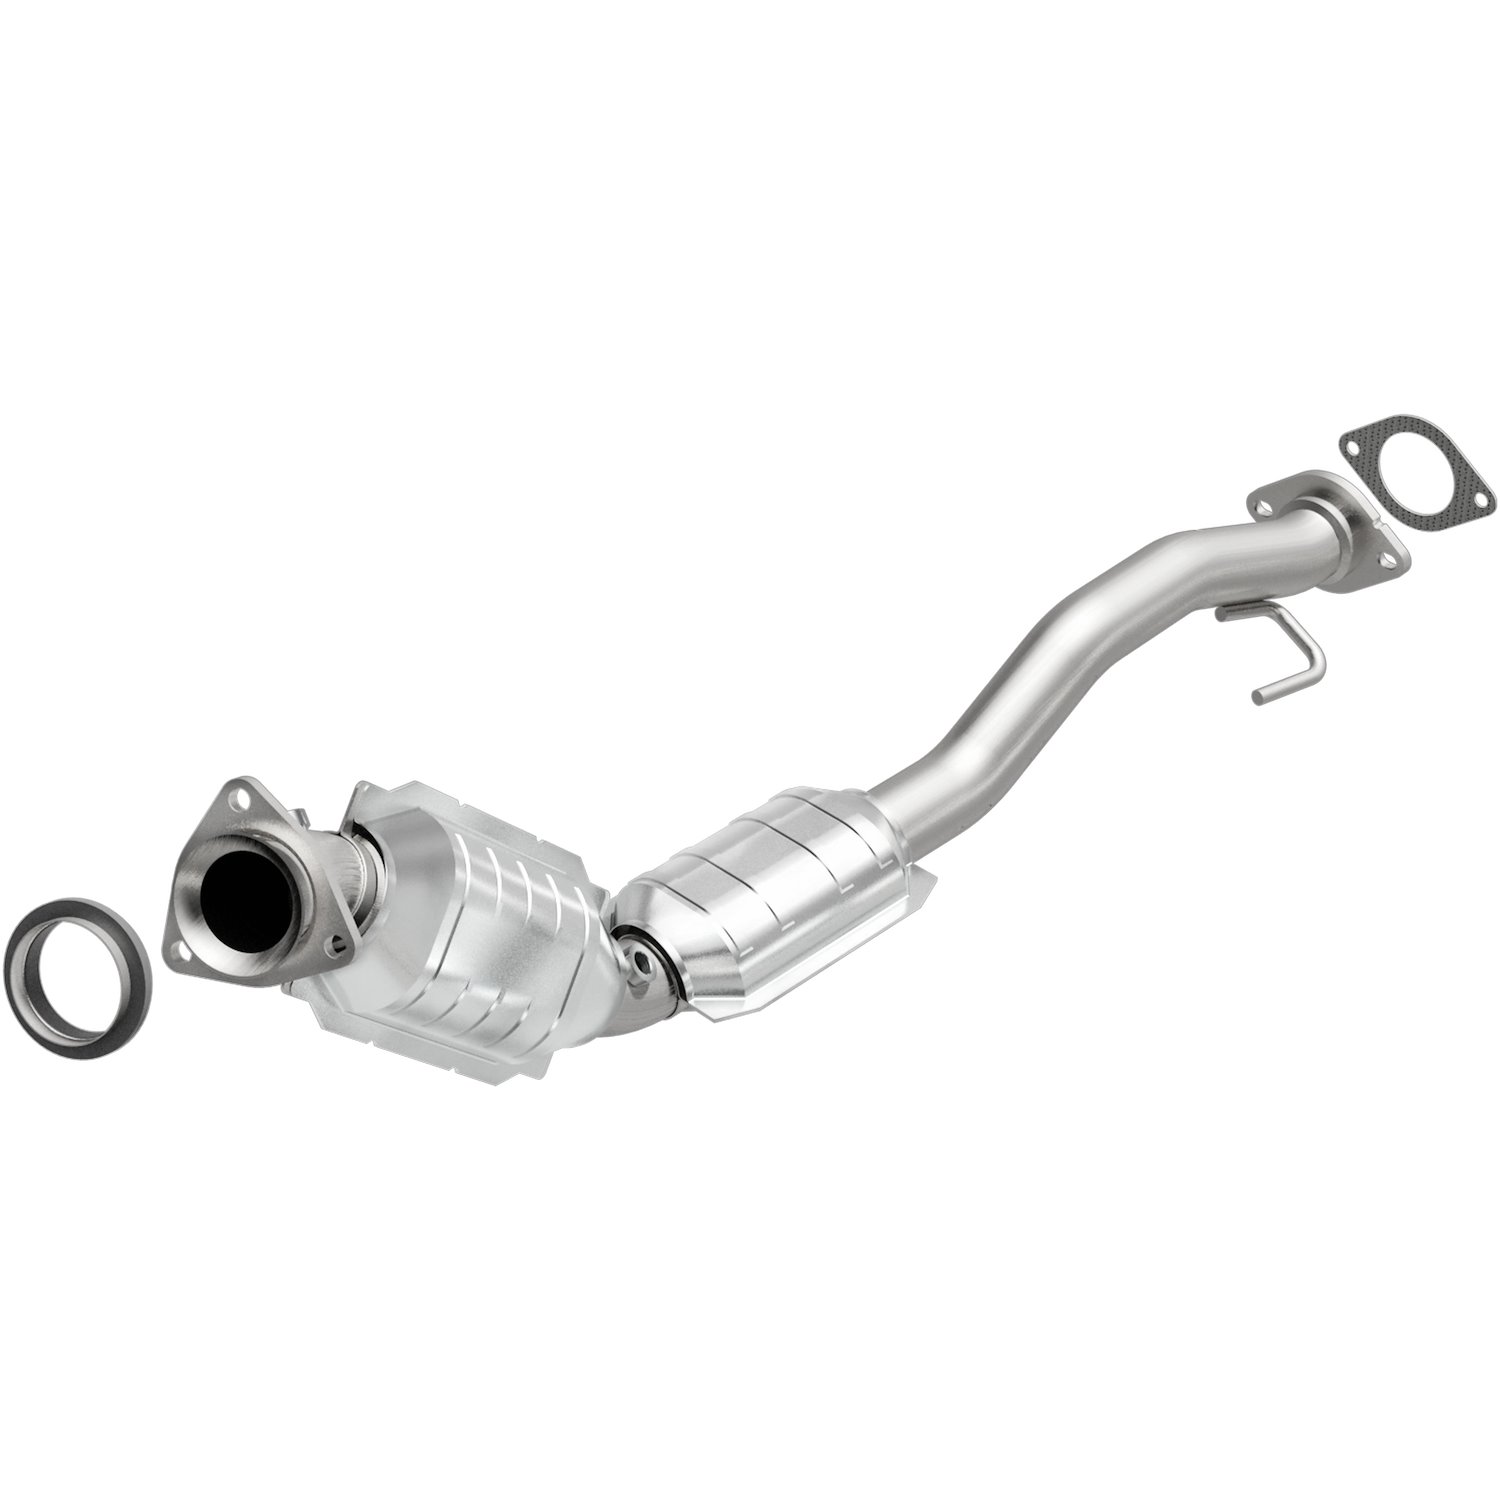 OEM Grade Federal / EPA Compliant Direct-Fit Catalytic Converter 49222